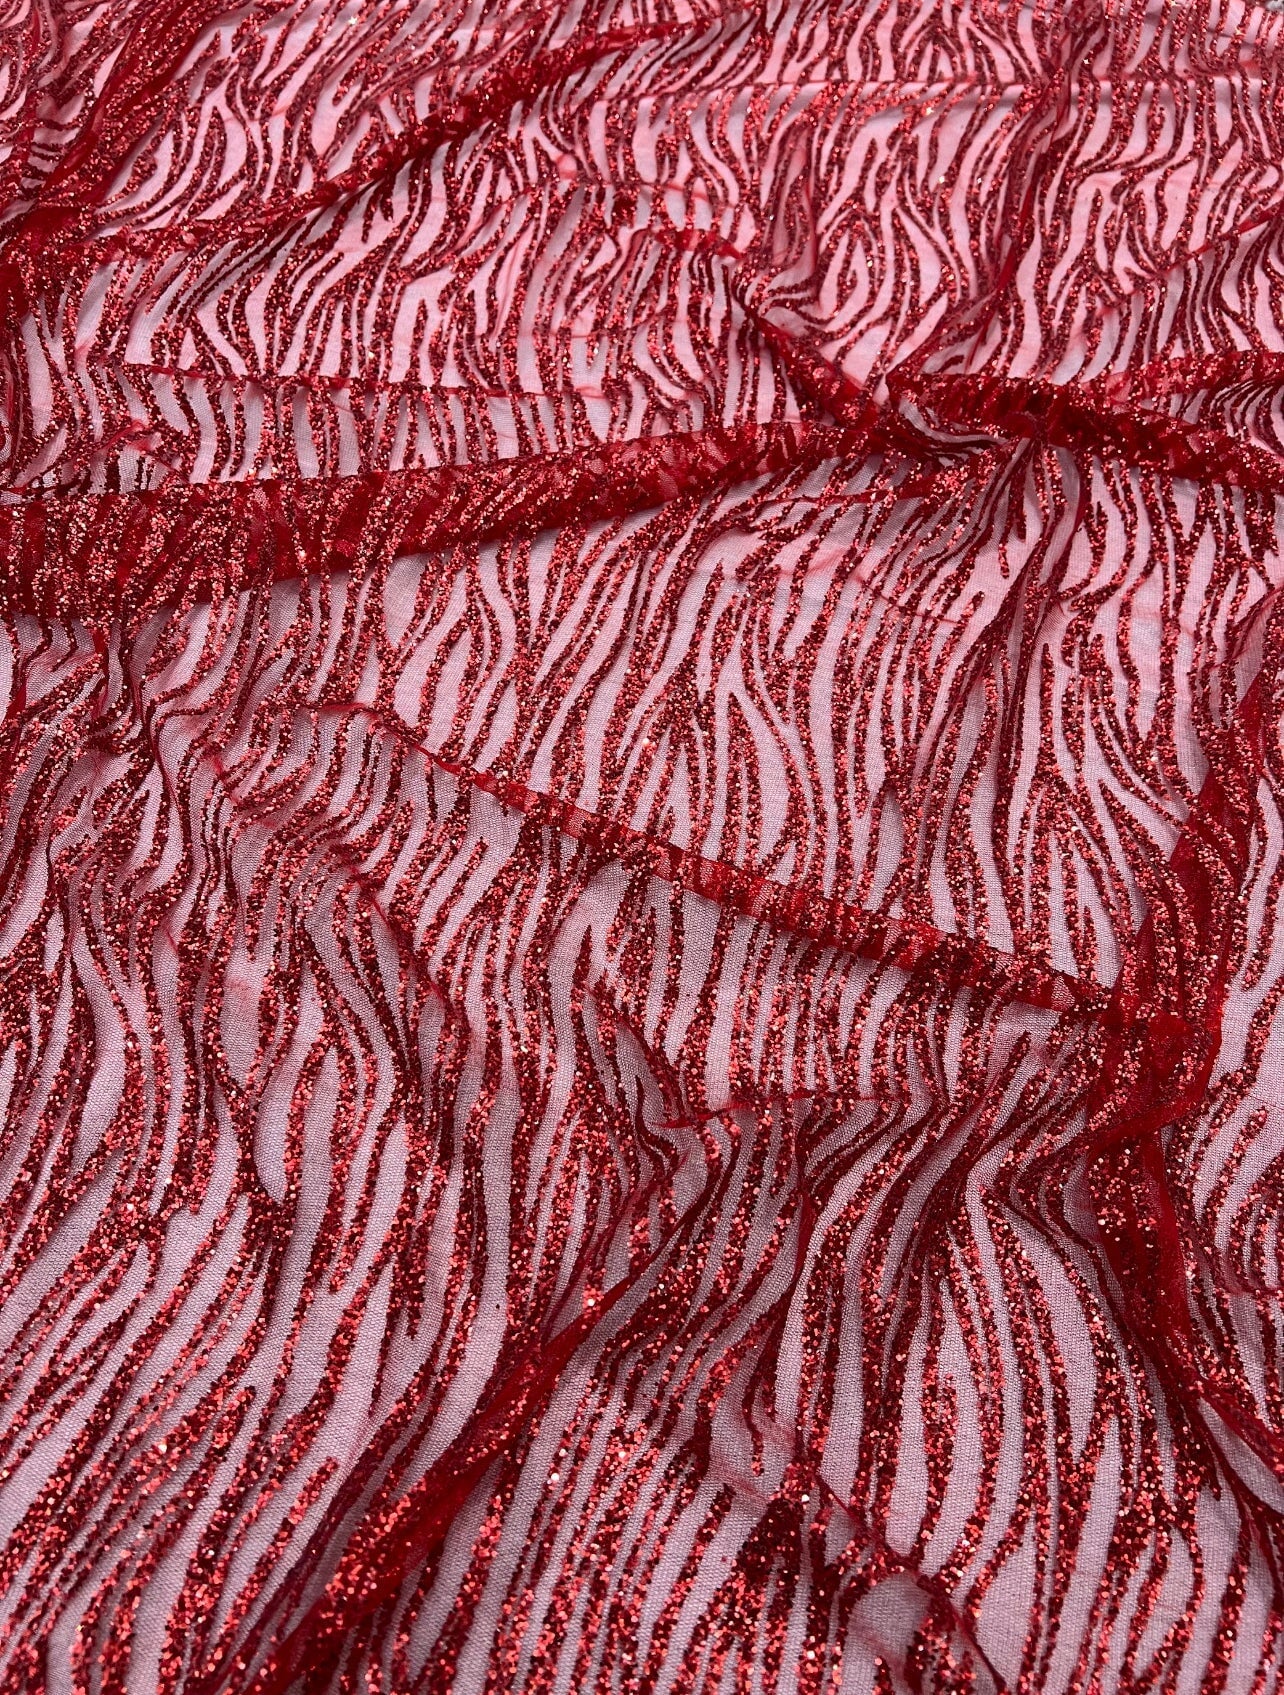 Red Glitter Lace Fabric on Mesh, dark red lace Glitter, light red Lace, blood red lace, lace for woman, lace for bride,  lace on discount, lace on sale, premium lace, kiki textile lace, lace for party wear dresses, lace on mesh